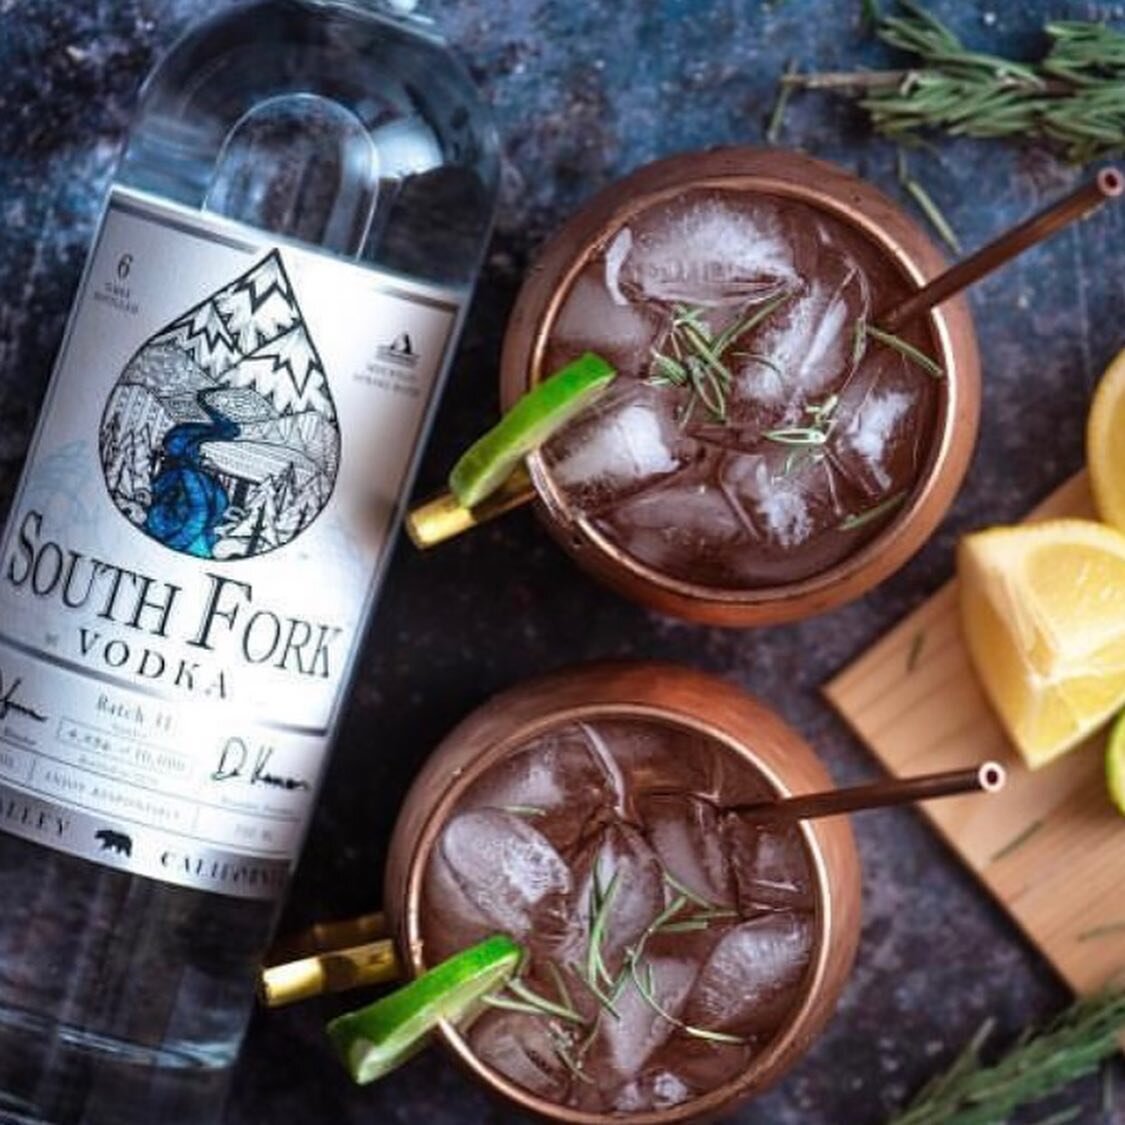 Check out these beautiful photos from our friend @savvykayphotographyandfilms &amp; @nevadacountykitchens . #southforkvodka #satellitespirits #smallbatch #craftvodka #supportlocal #local 
#awardwinningvodka #97points #gold
#sharewithlovedones #celebr